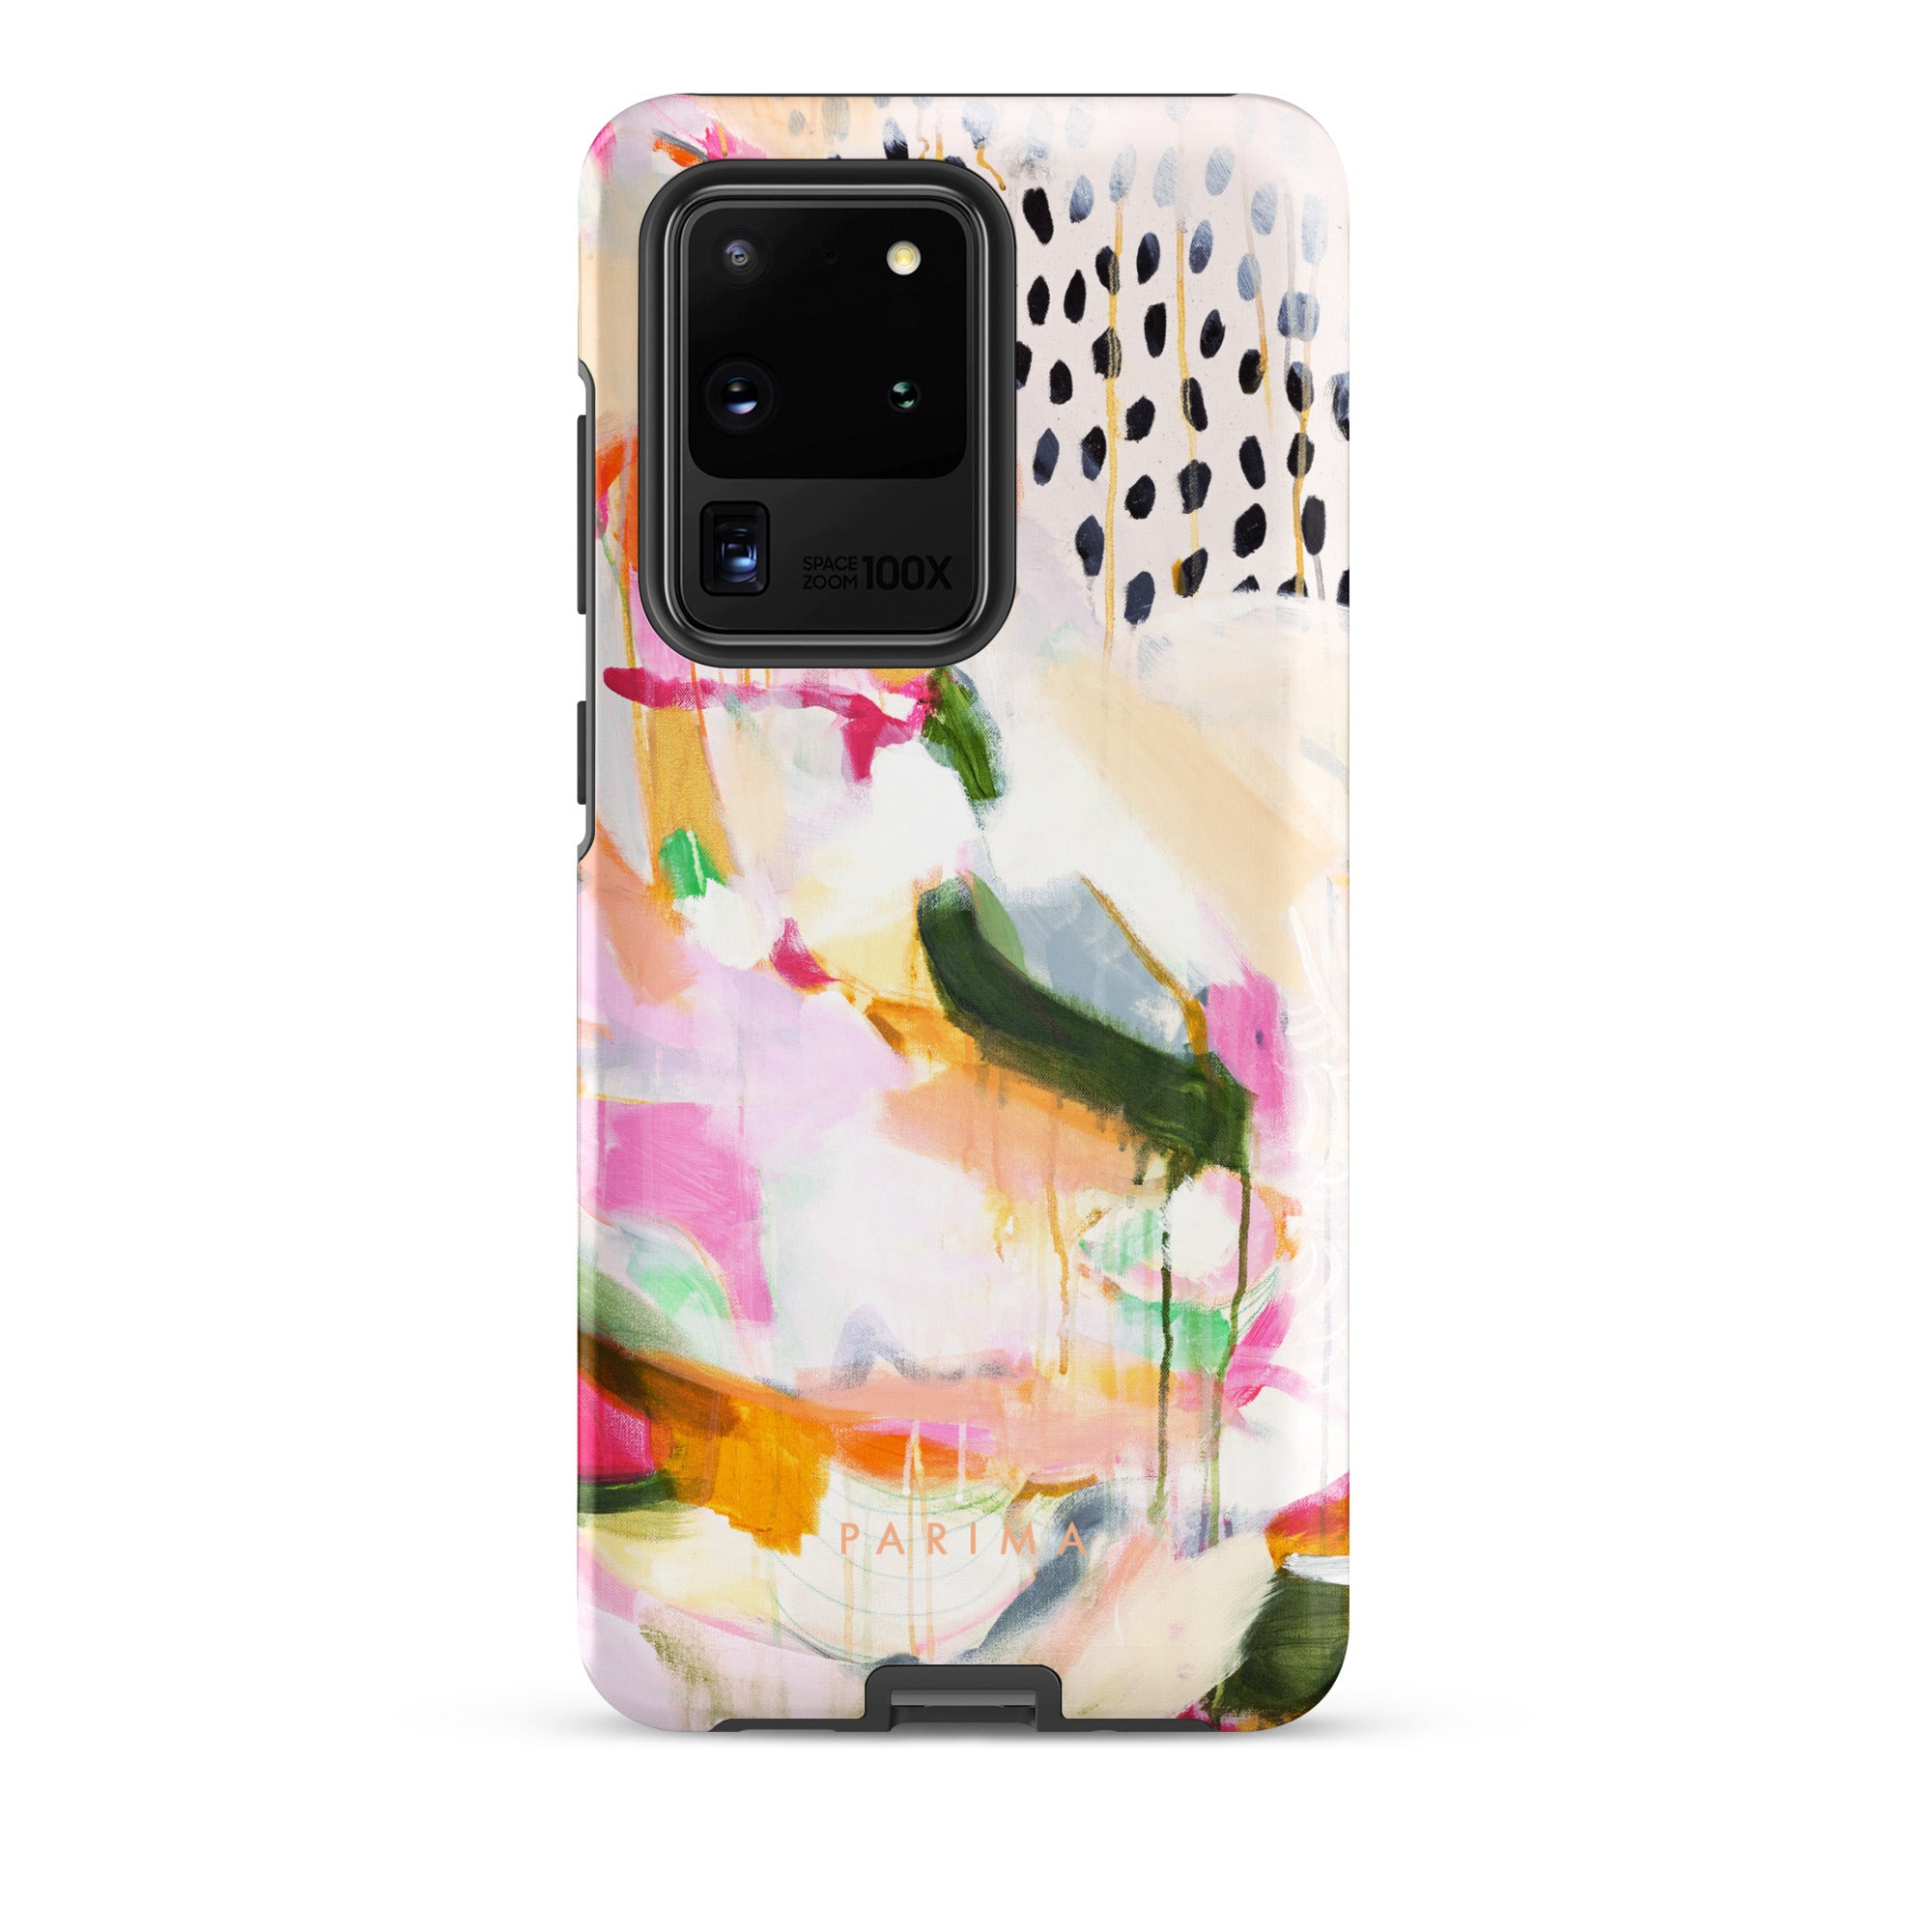 Adira, pink and green abstract art on Samsung Galaxy S20 Ultra tough case by Parima Studio